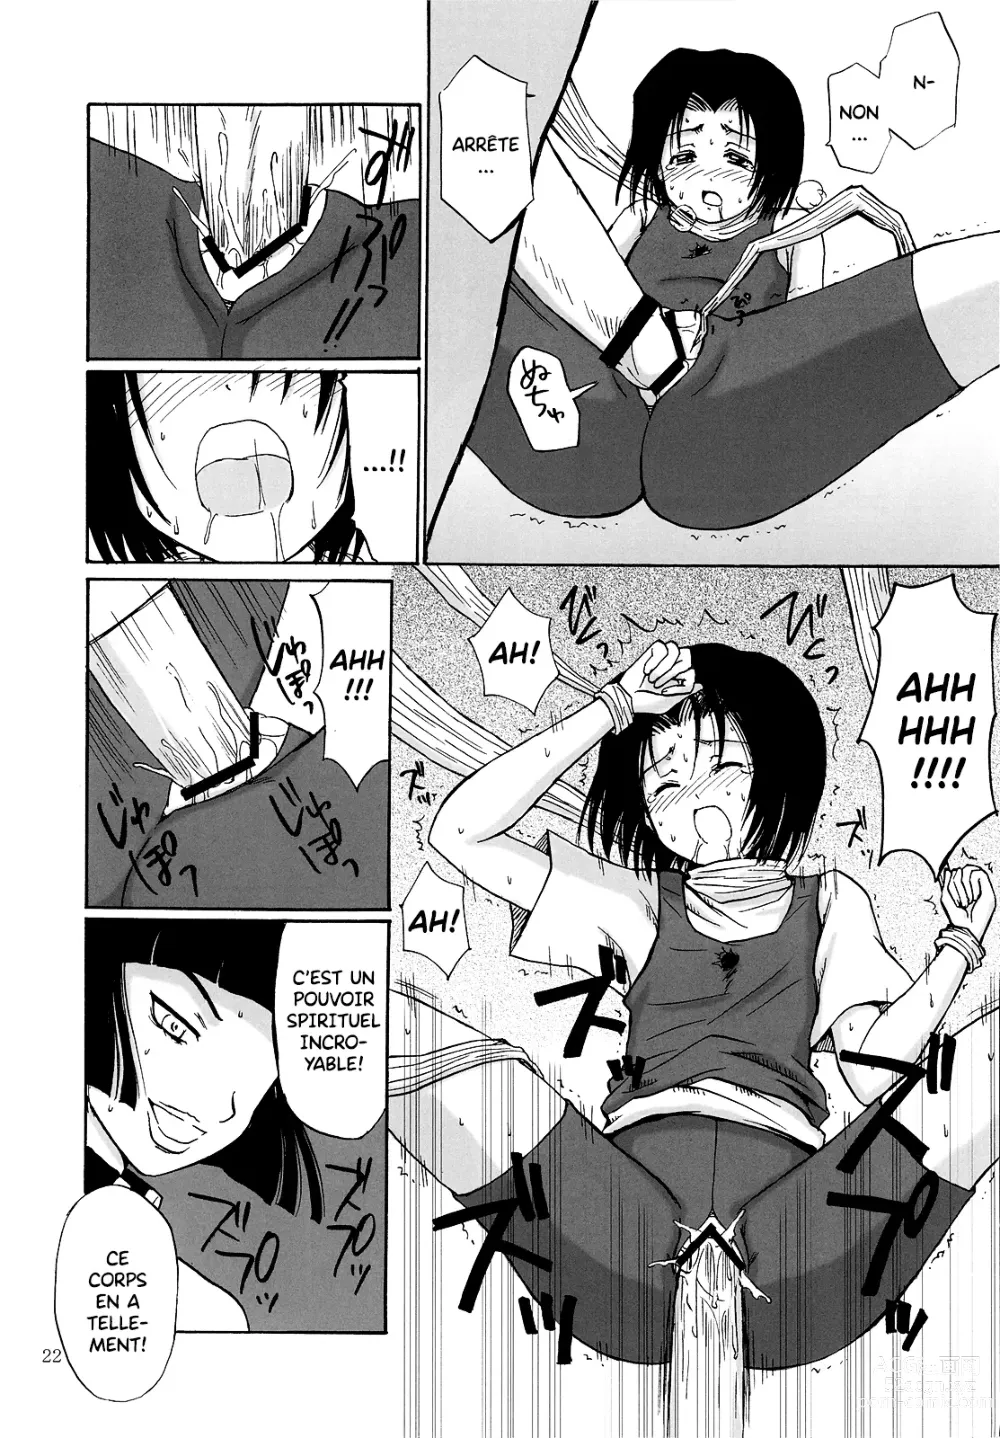 Page 22 of doujinshi OTHERSIDE Kaiteiban